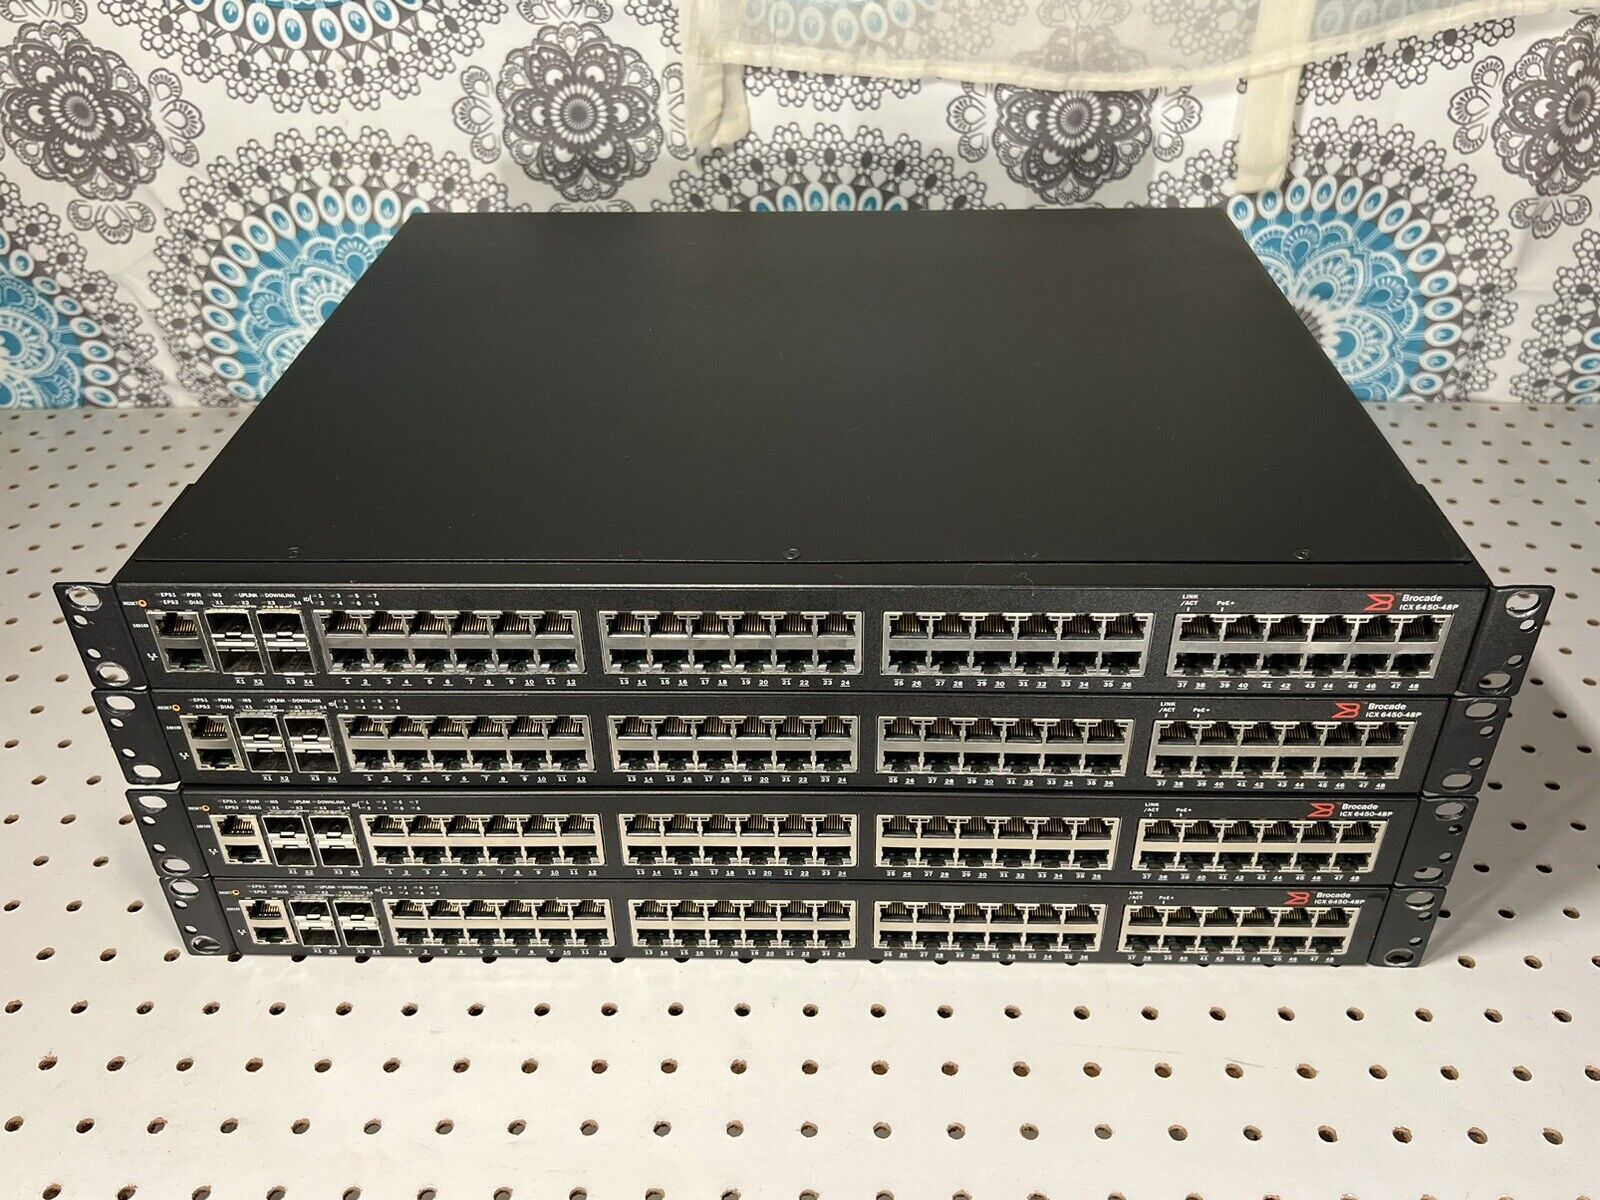 LOT 4 Brocade Communications Systems ICX 6450-48P 48-Port ICX6450 10G POE Switch